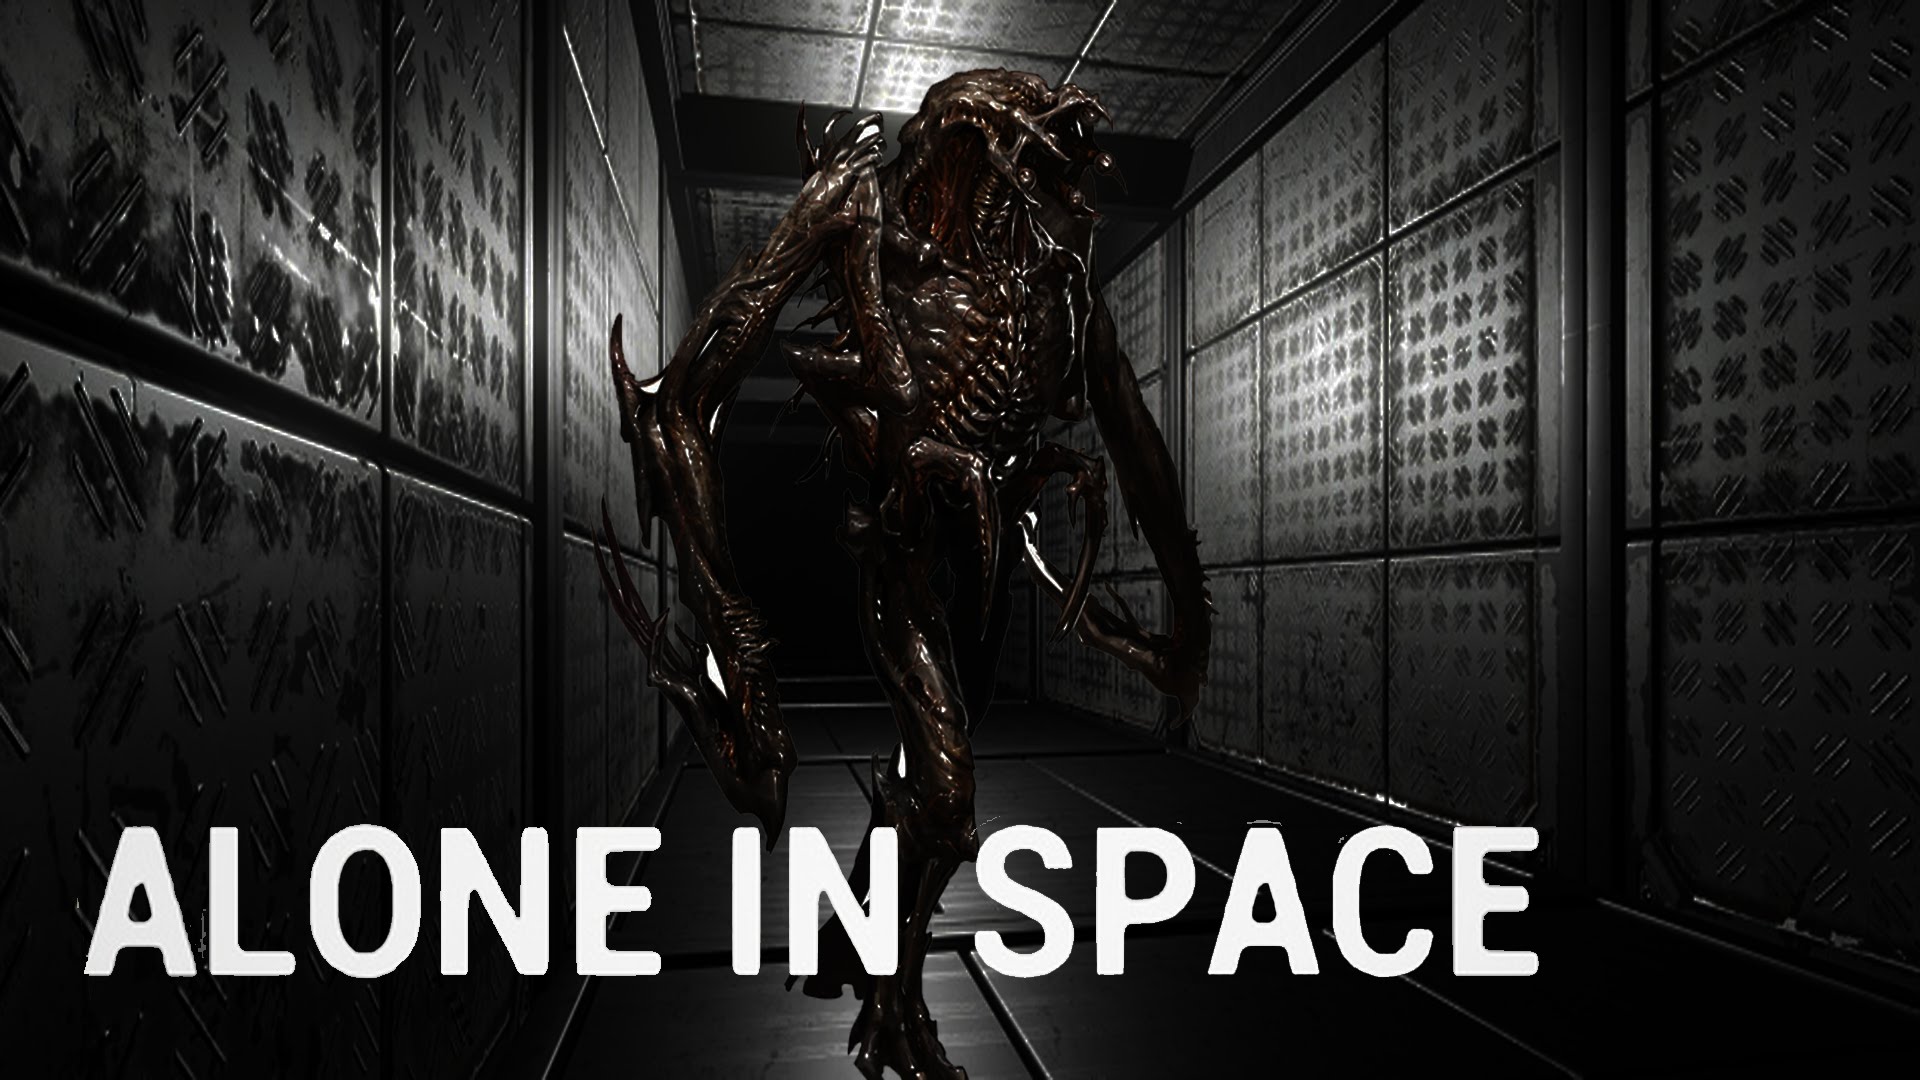 Alone in space pc game